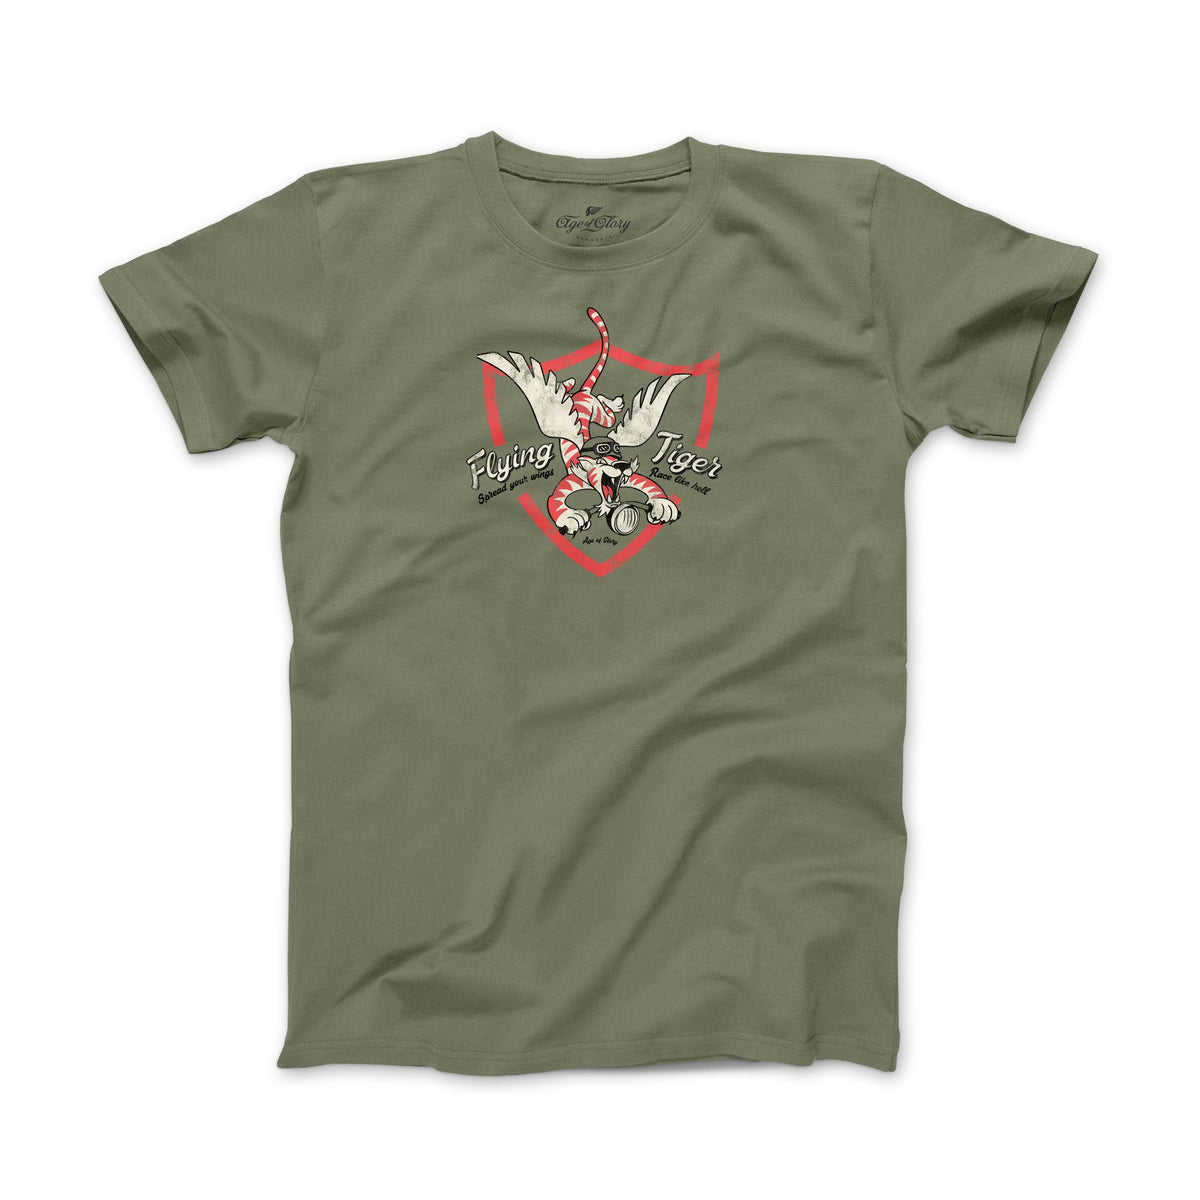 Age of Glory Flying Tiger T-Shirt